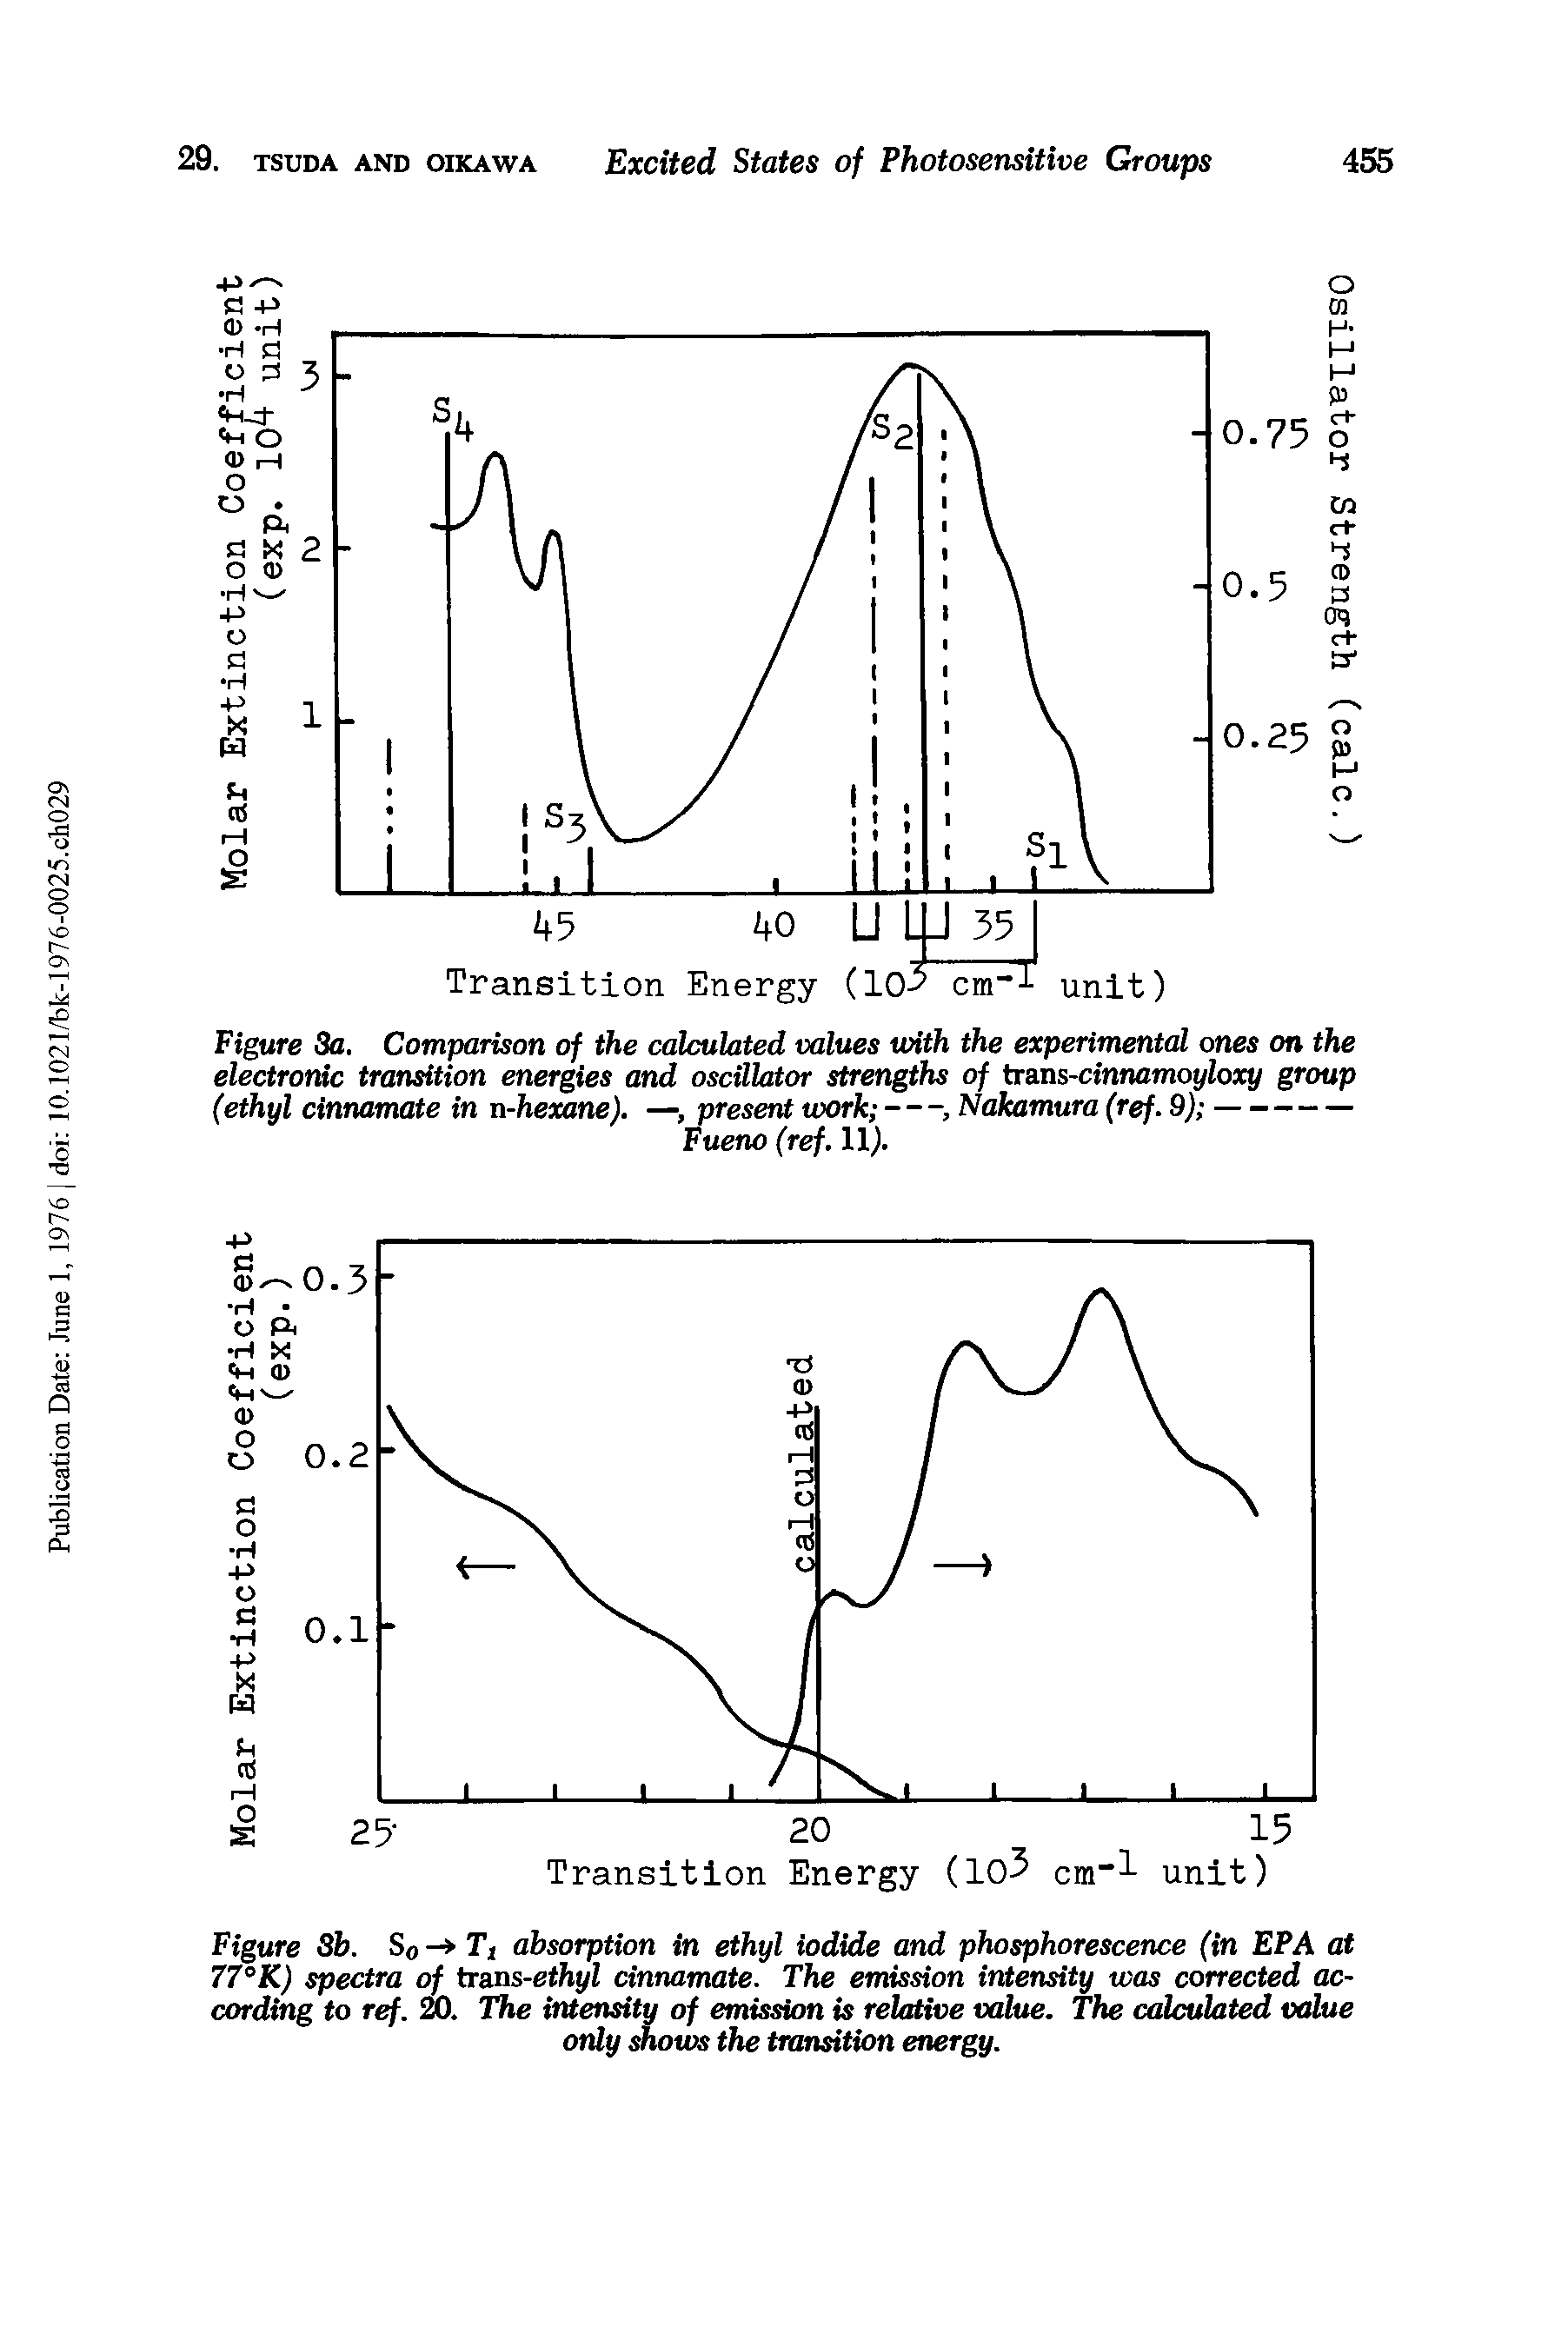 Figure 3b. So - T, absorption in ethyl iodide and phosphorescence (in EPA at 77°K) spectra of trans-ethyl cinnamate. The emission intensity was corrected according to ref. The intensity of emission is relative value. The calculated value only snows the transition energy.